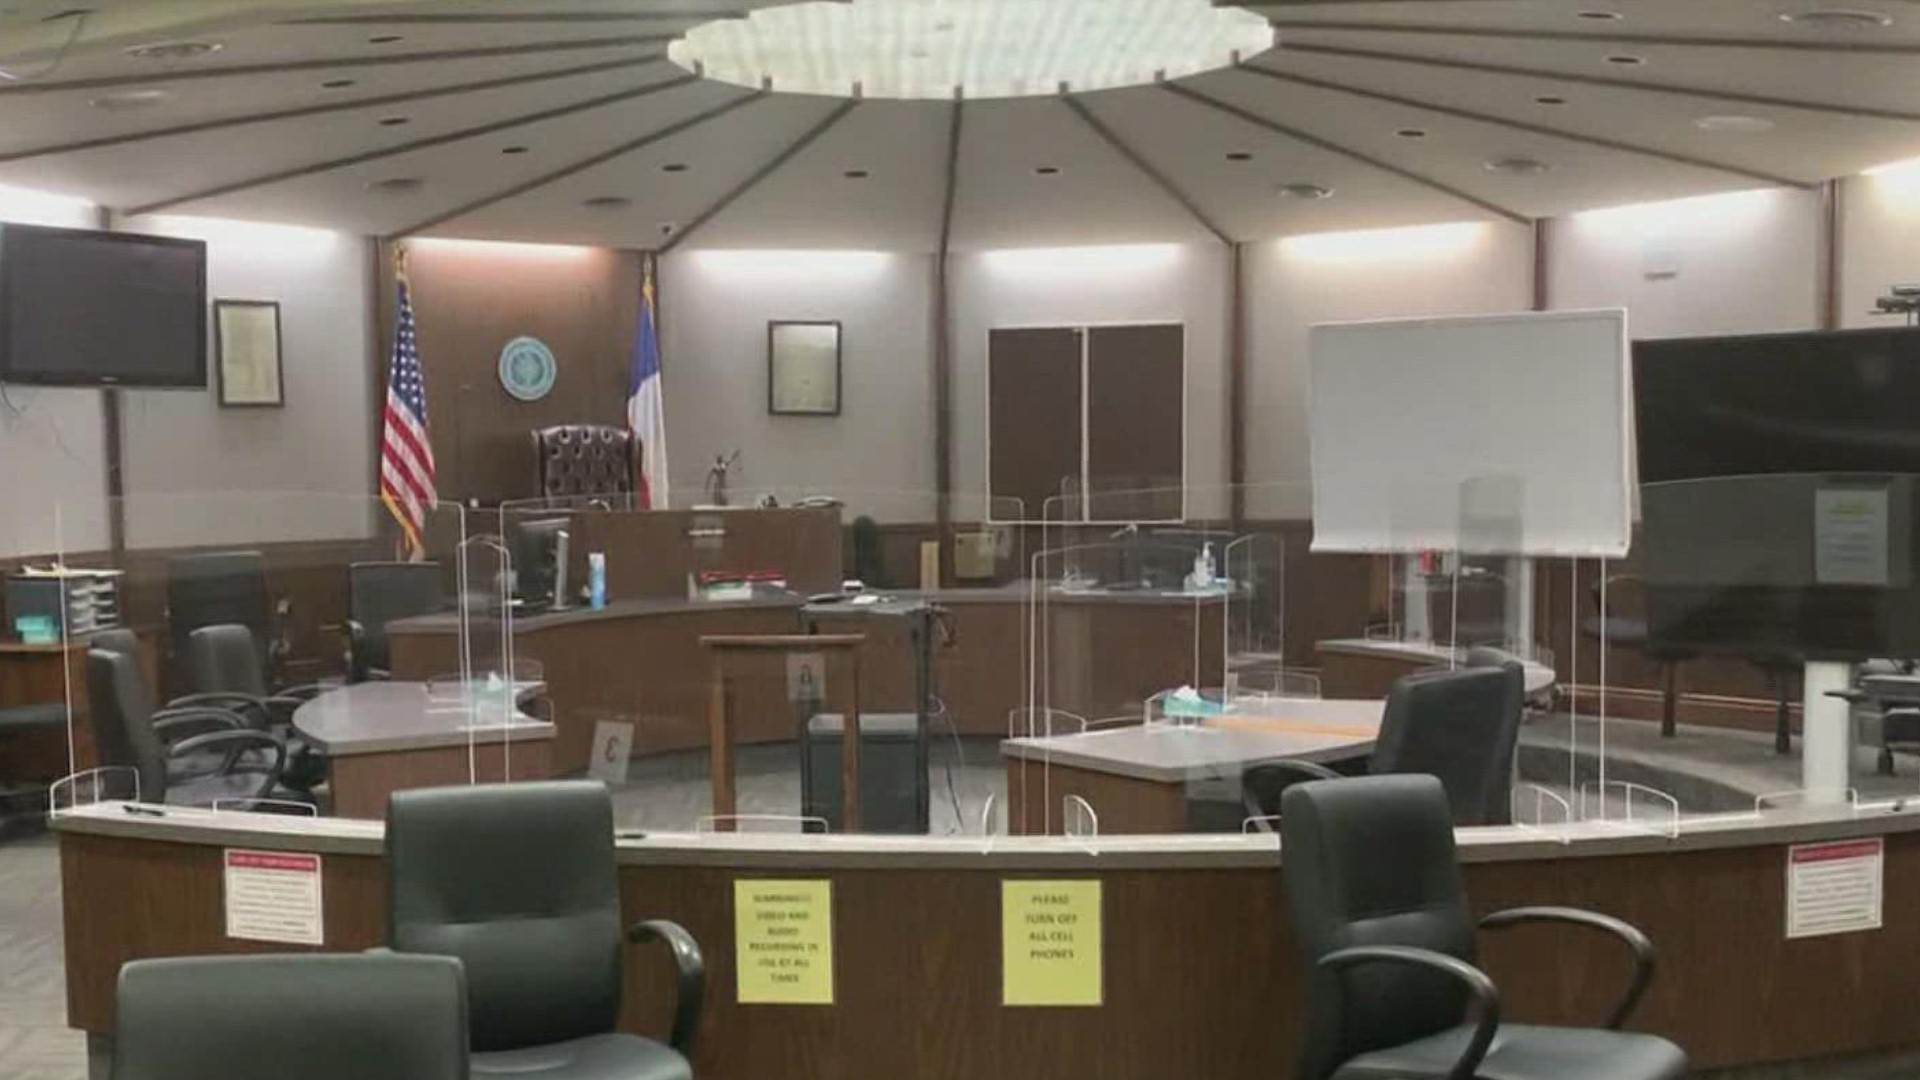 According to Judge David Stith -- the local administrative district judge for Nueces County-- jury service will be put on hold until at least the week of Jan. 24